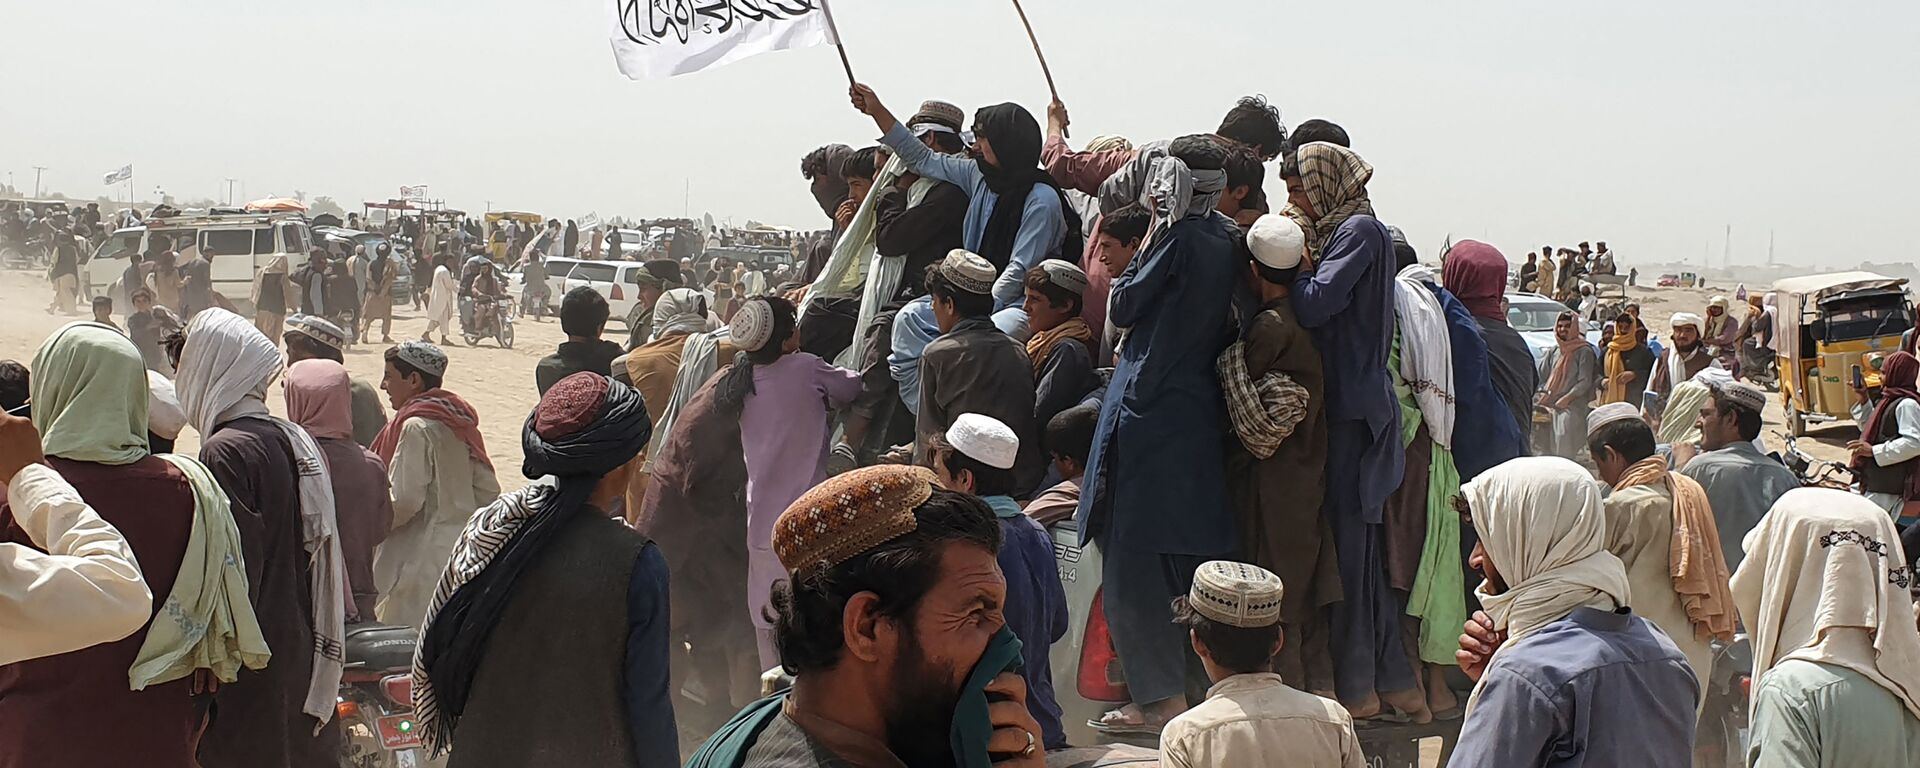 People wave Taliban flags as they drive through the Pakistani border town of Chaman on July 14, 2021, after the Taliban claimed they had captured the Afghan side of the border crossing of Spin Boldak along the frontier with Pakistan - Sputnik International, 1920, 14.07.2021